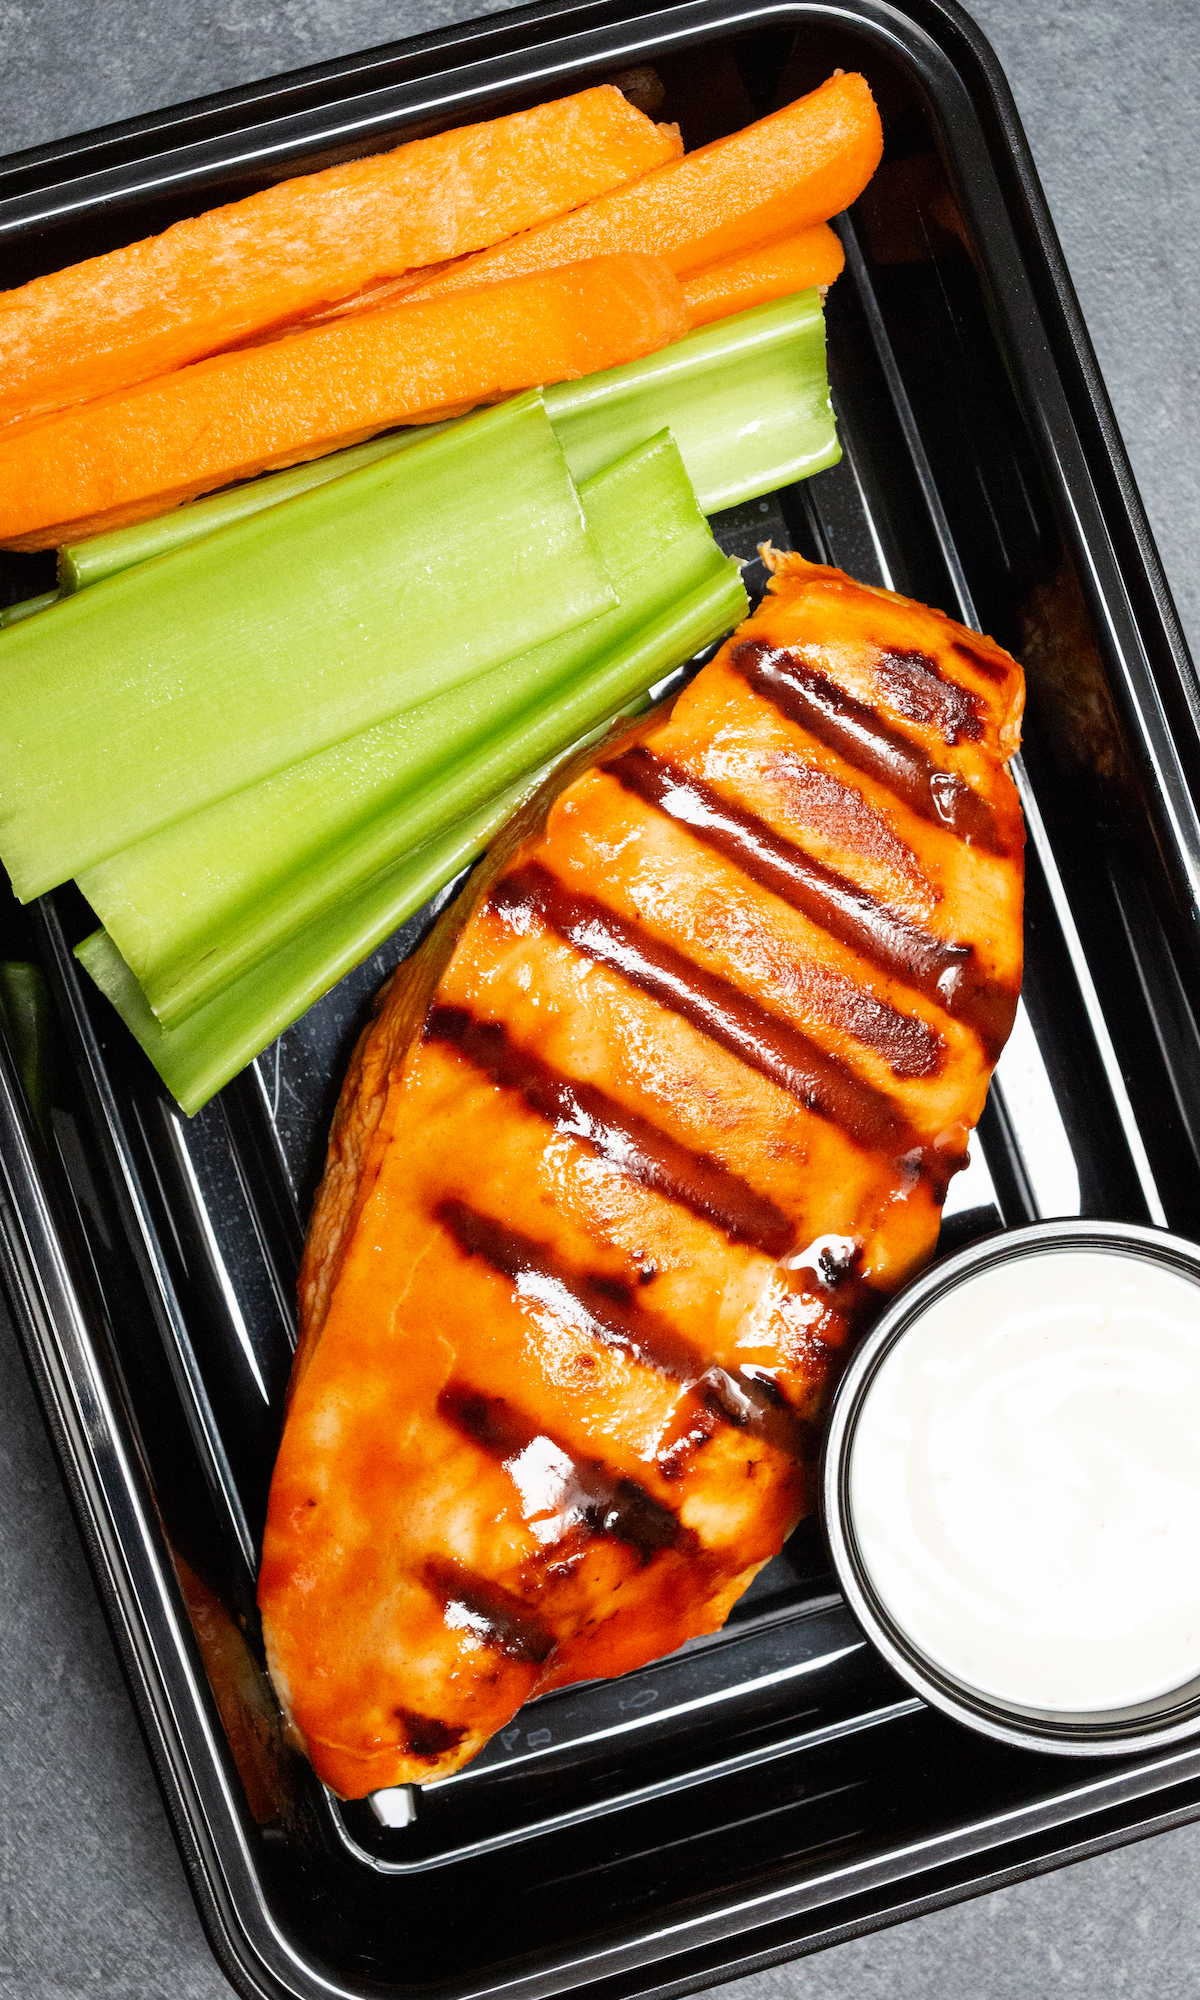 Overhead view of a disposable black plastic meal prep container that contains a grilled chicken breast slathered in orange buffalo sauce next to carrot and celery sticks and a small container of greek ranch.